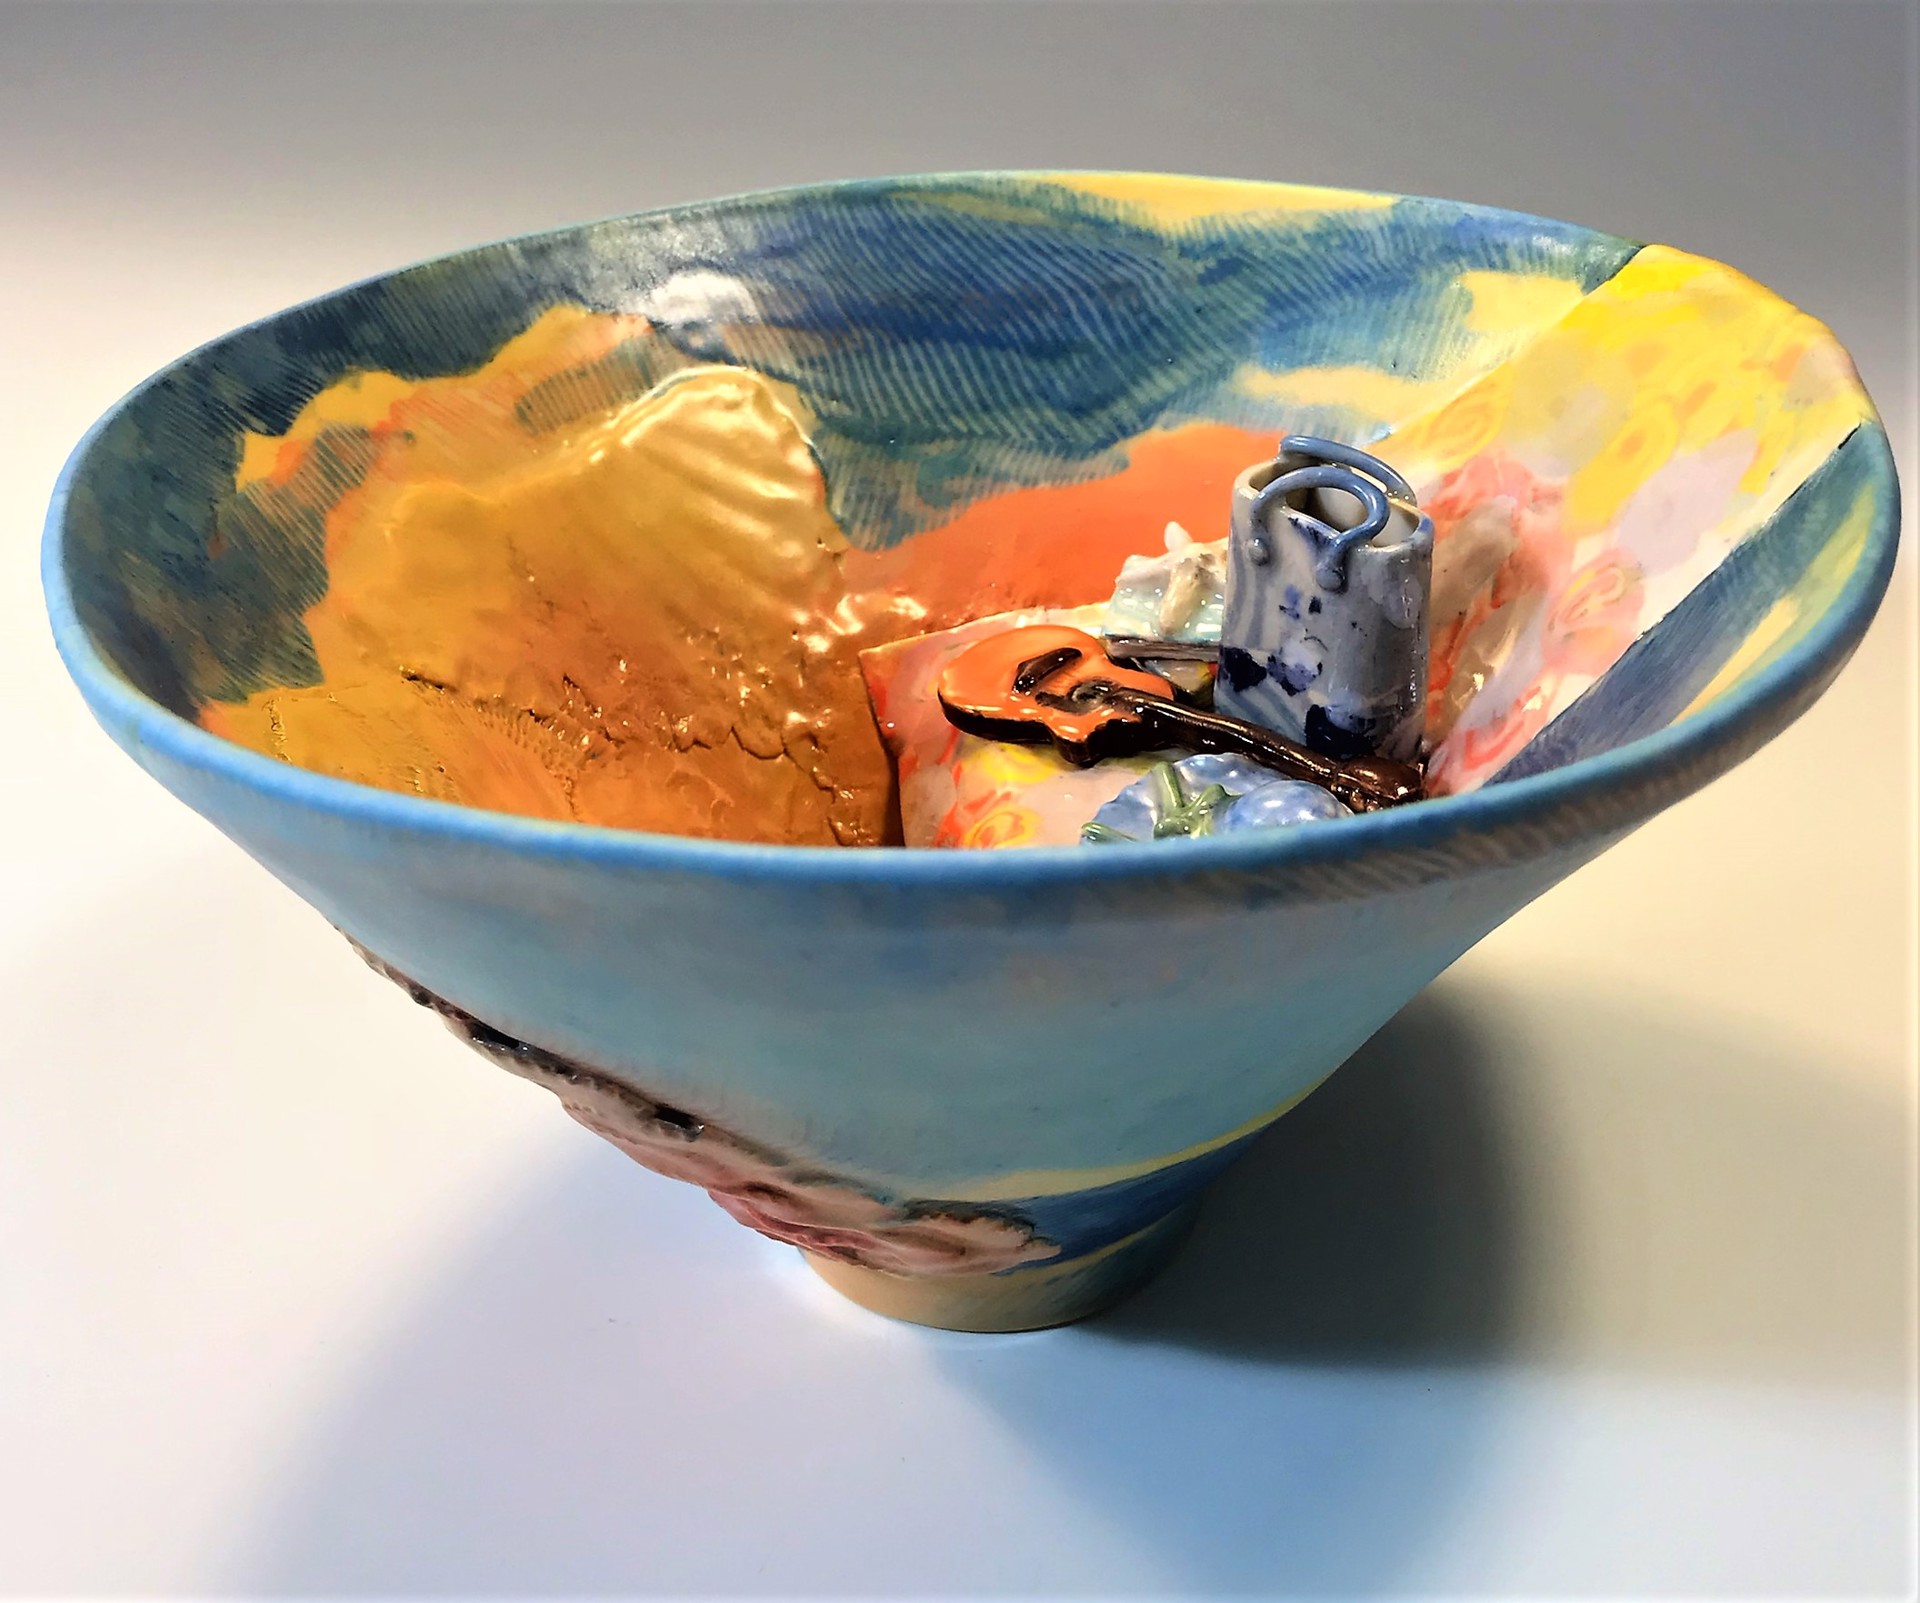 decorative bowl with a guitar and seat on the inside, blue and orange colors